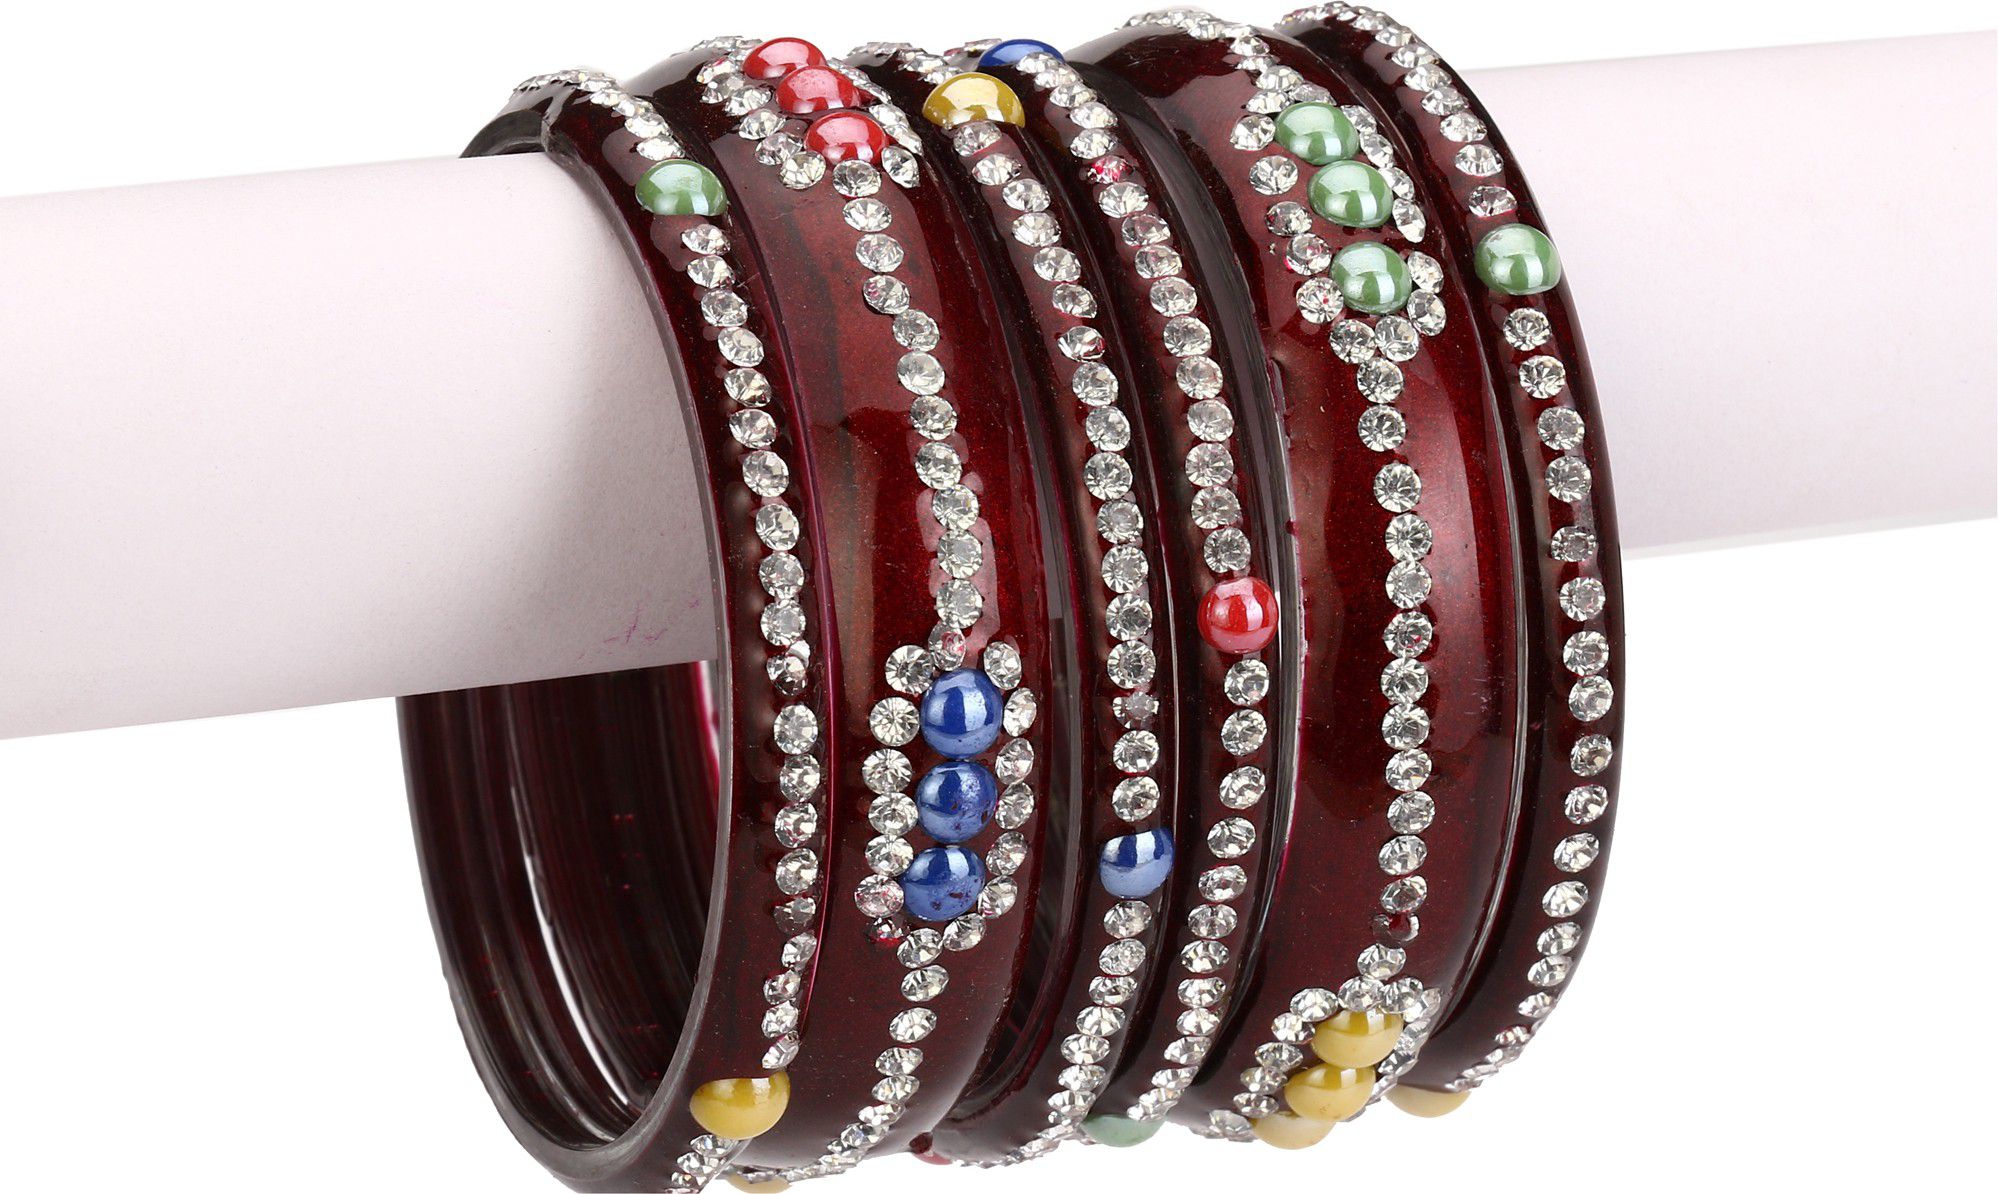     			Somil Maroon Color 2 & 4 Bangle Set decorative With Colorful Beads & Stones With Safety Box-DO_2.2